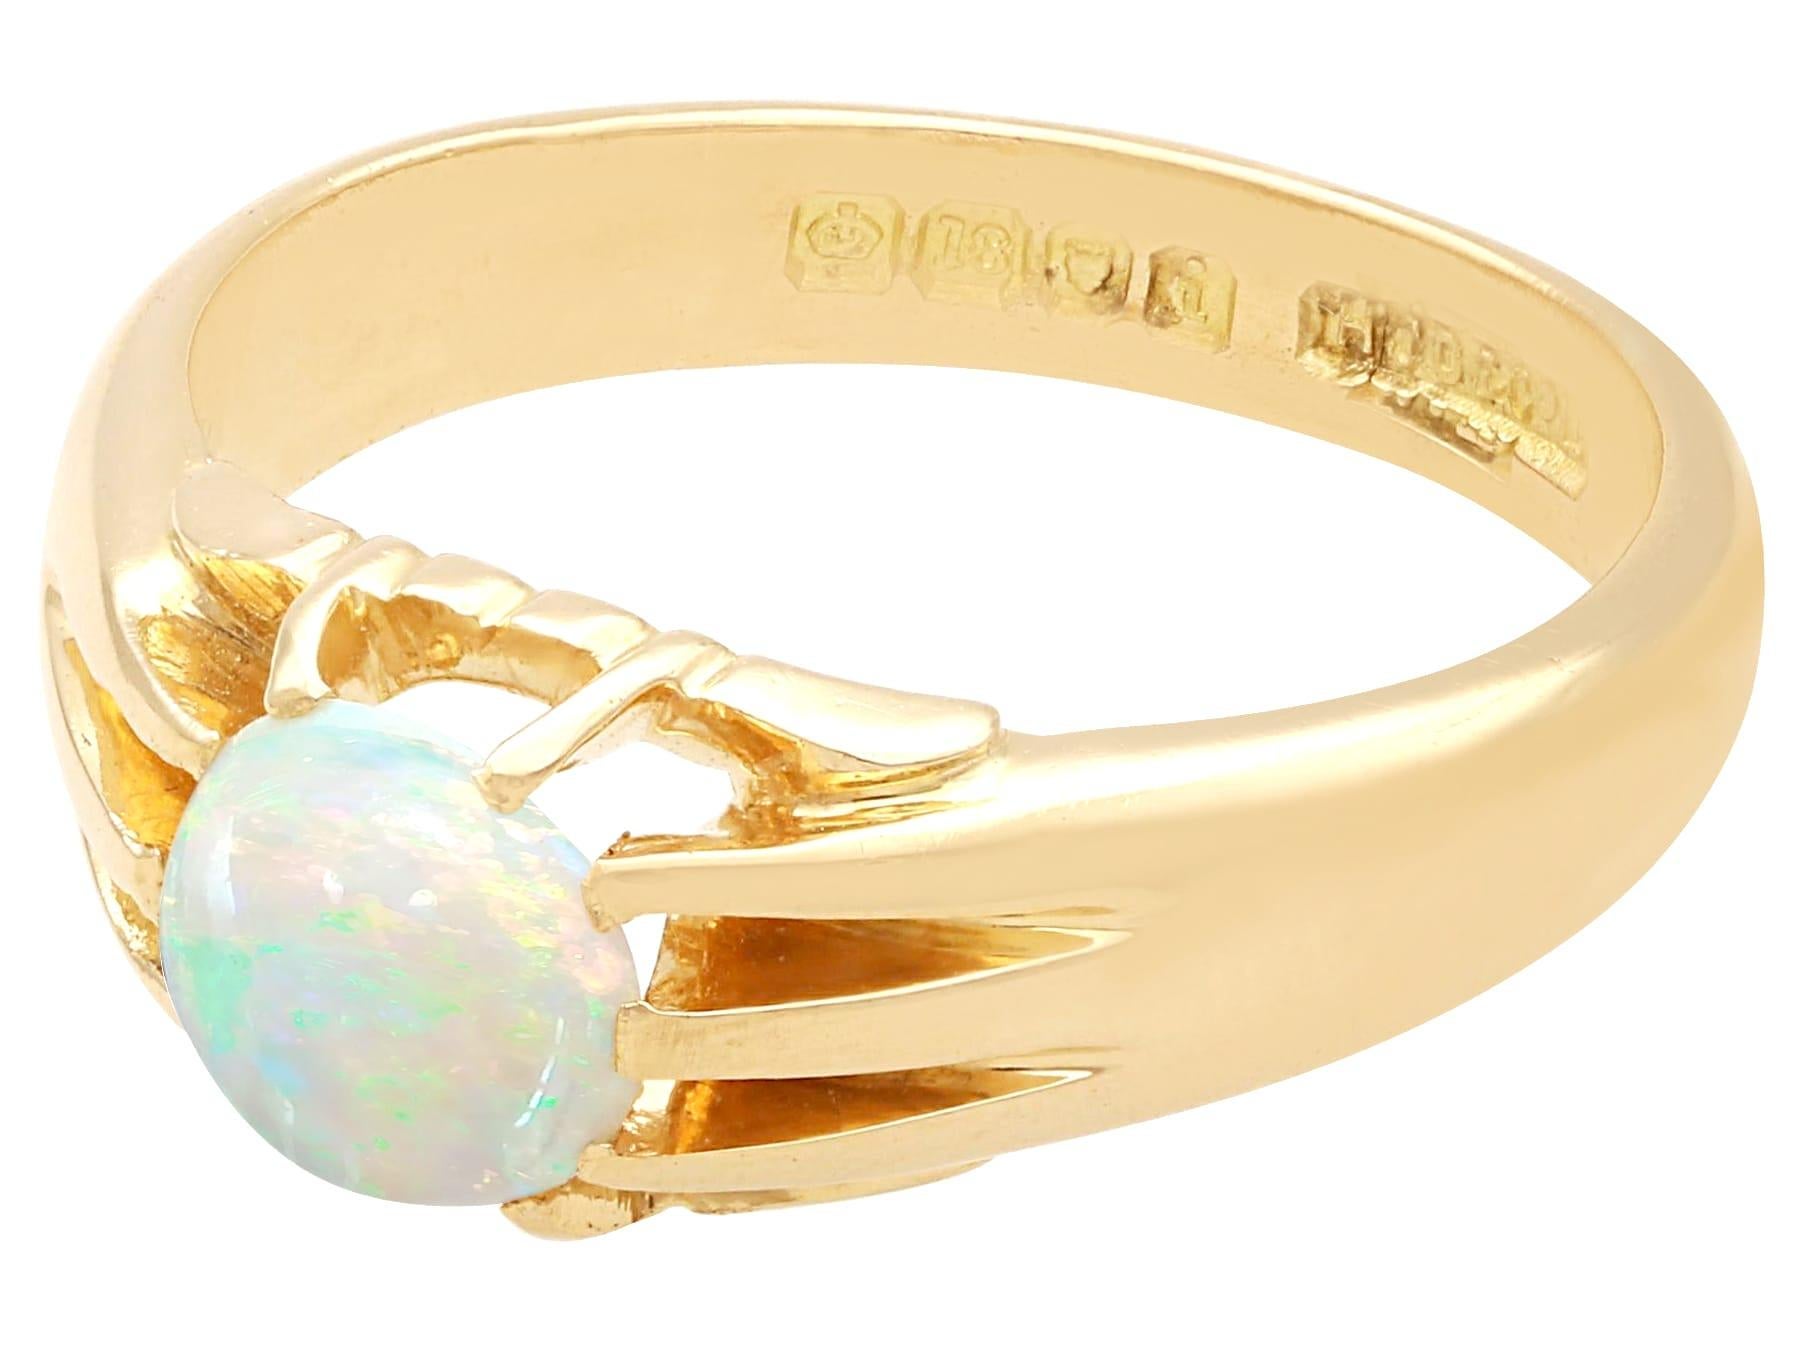 Cabochon Vintage 0.68 Carat Opal and 18 Karat Yellow Gold Ring For Sale